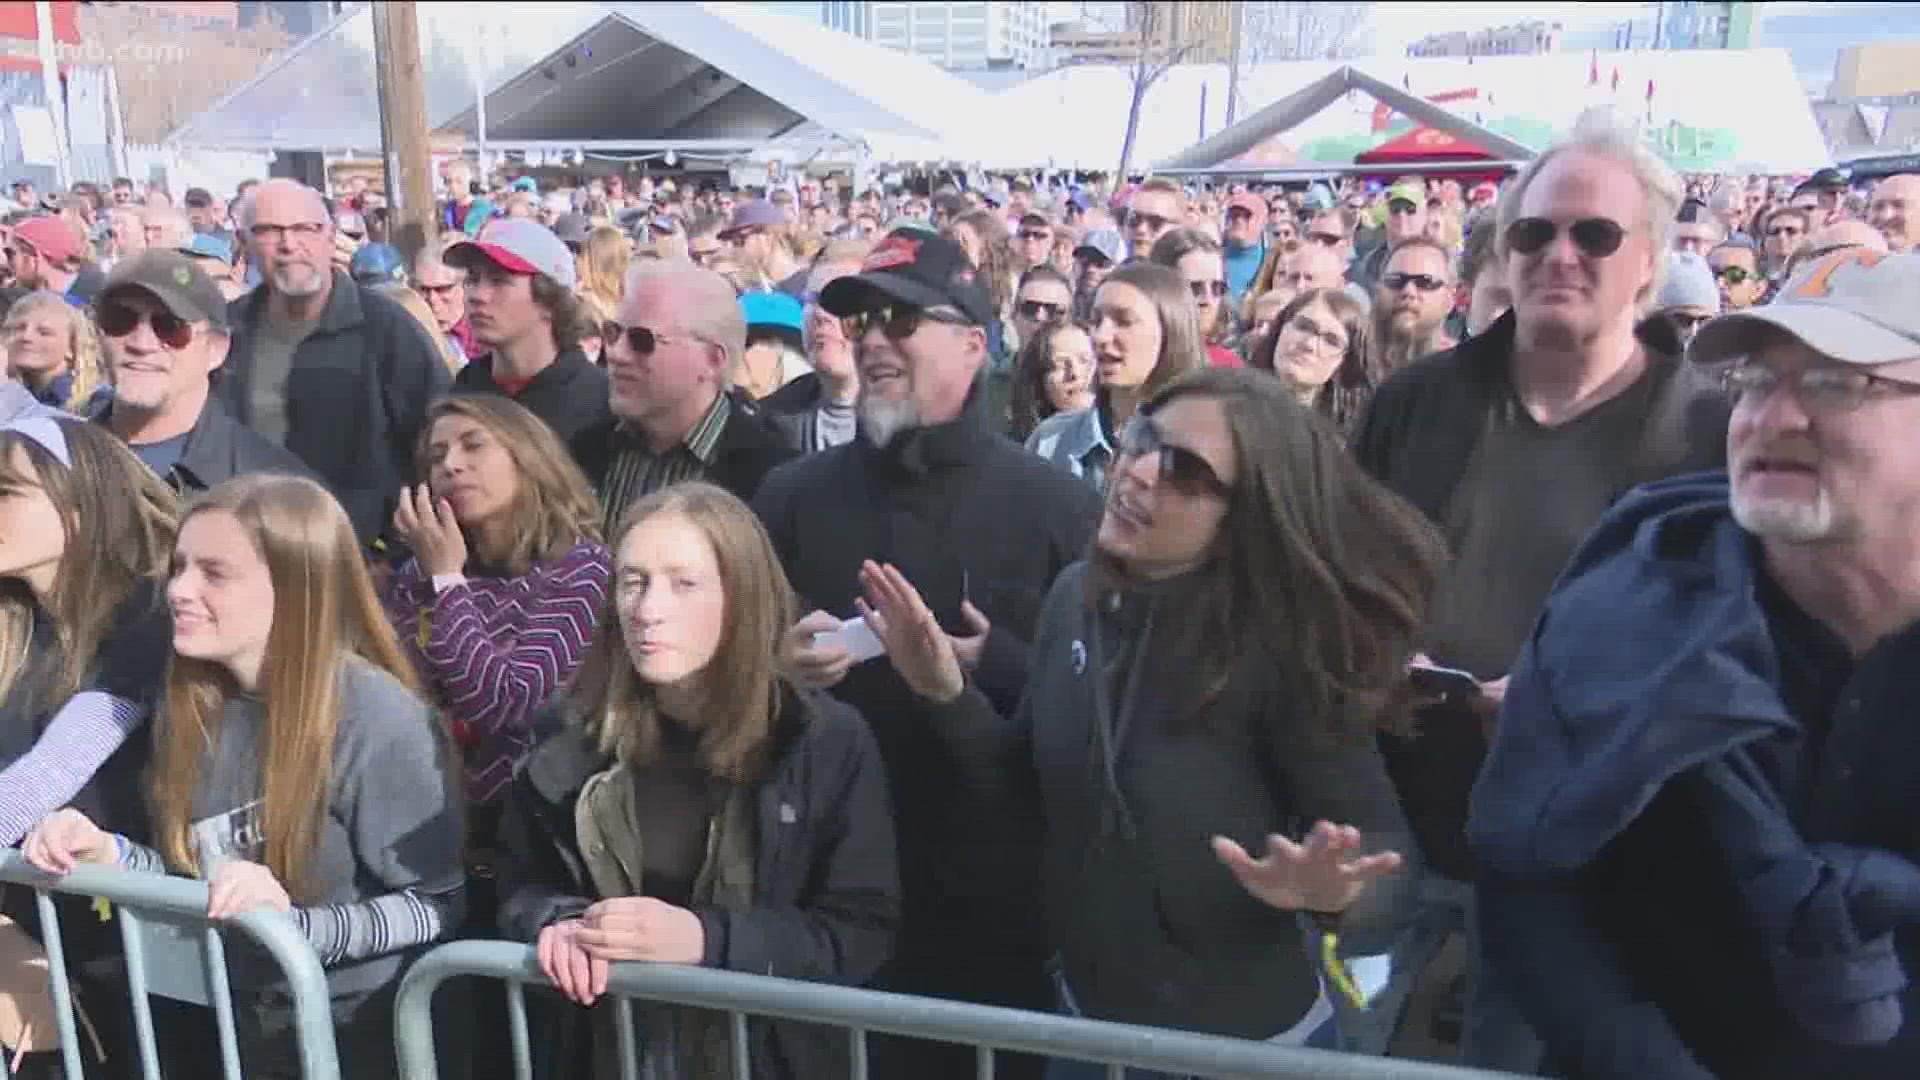 Organizers say they will not sell any more tickets to limit attendance at this year's event.